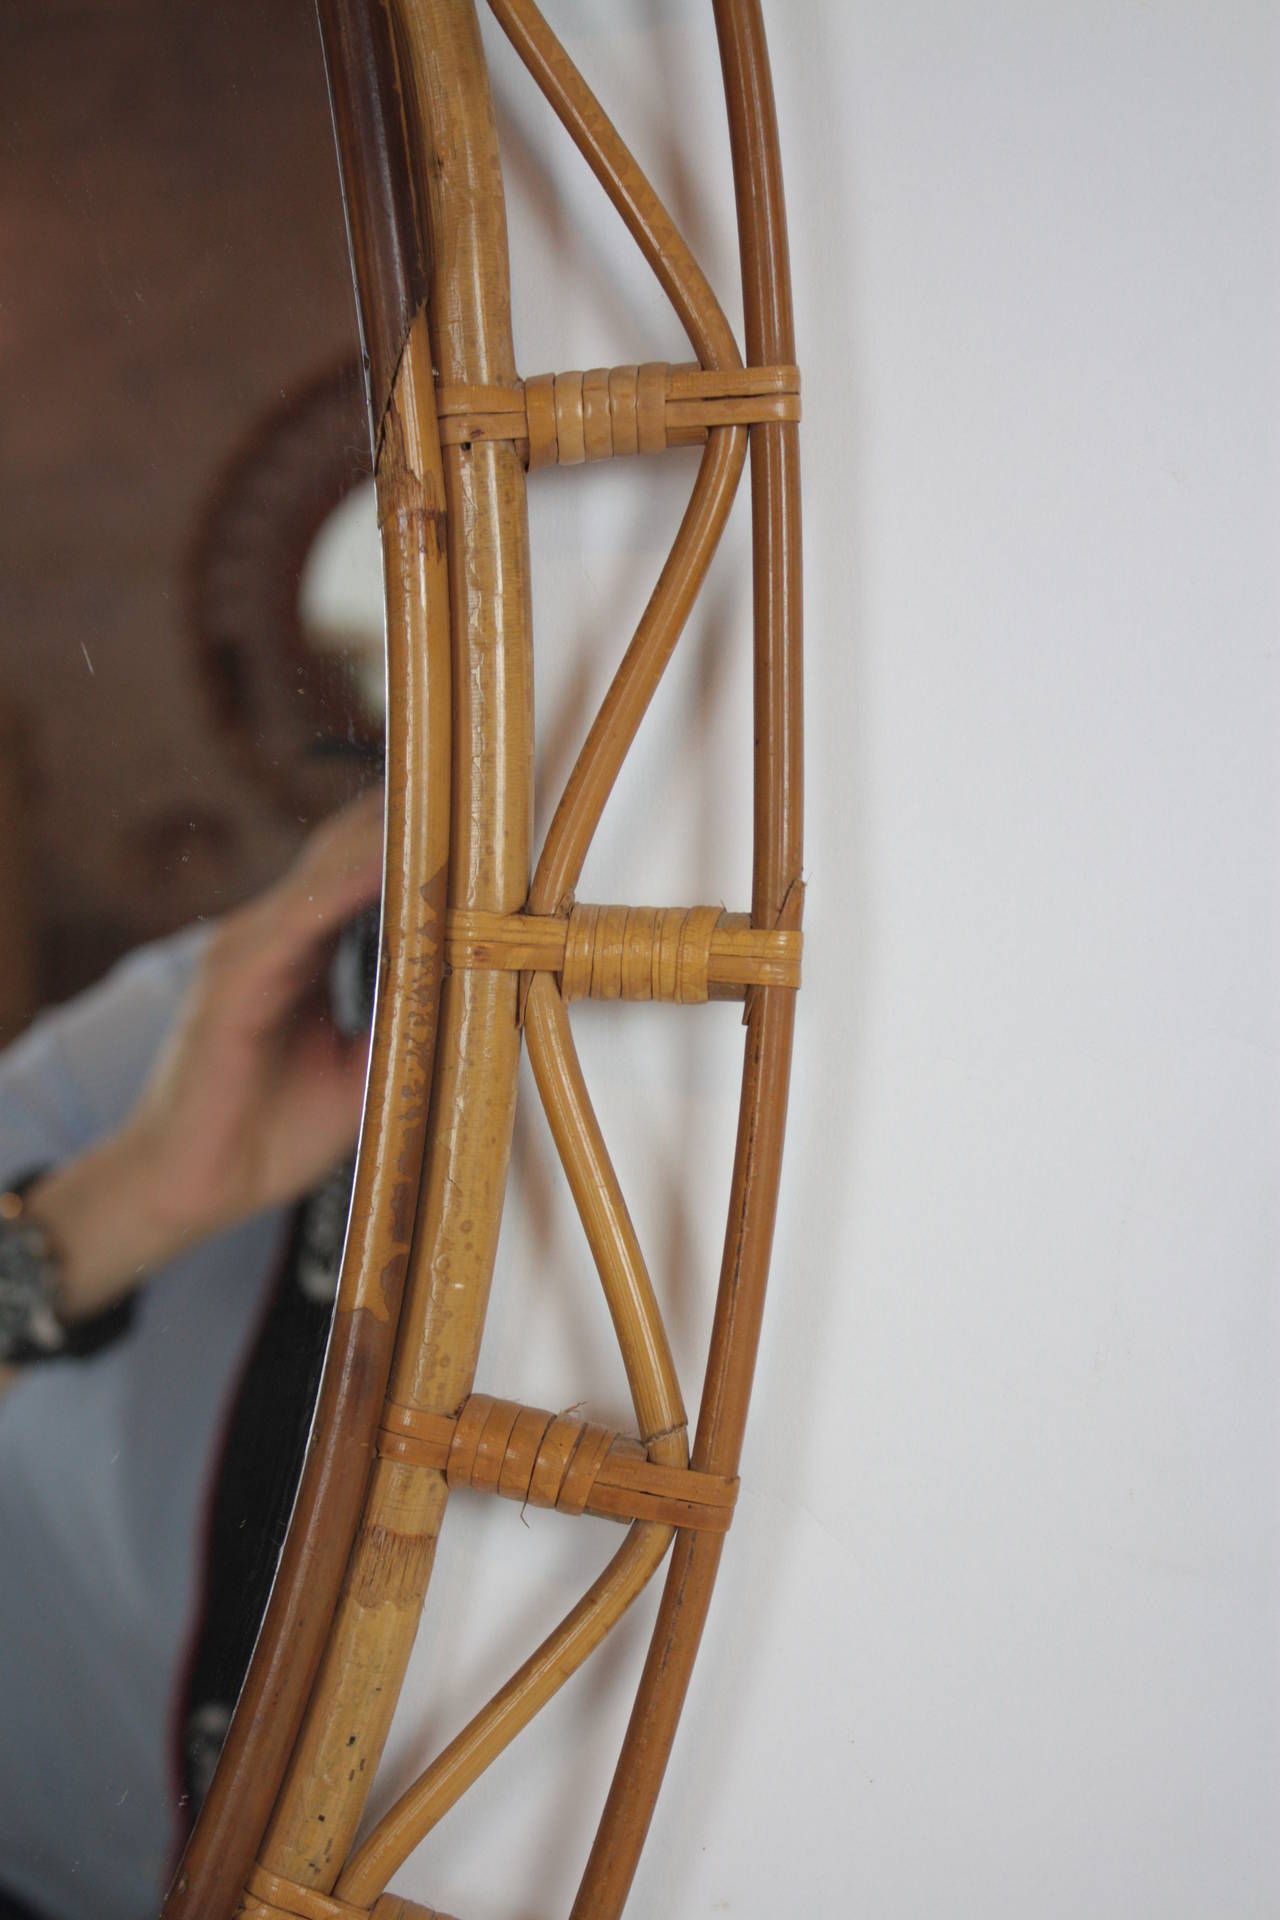 Mid-Century Modern Bamboo and Wicker Oval Mirror with Geometric Design from the Coast of Cadiz